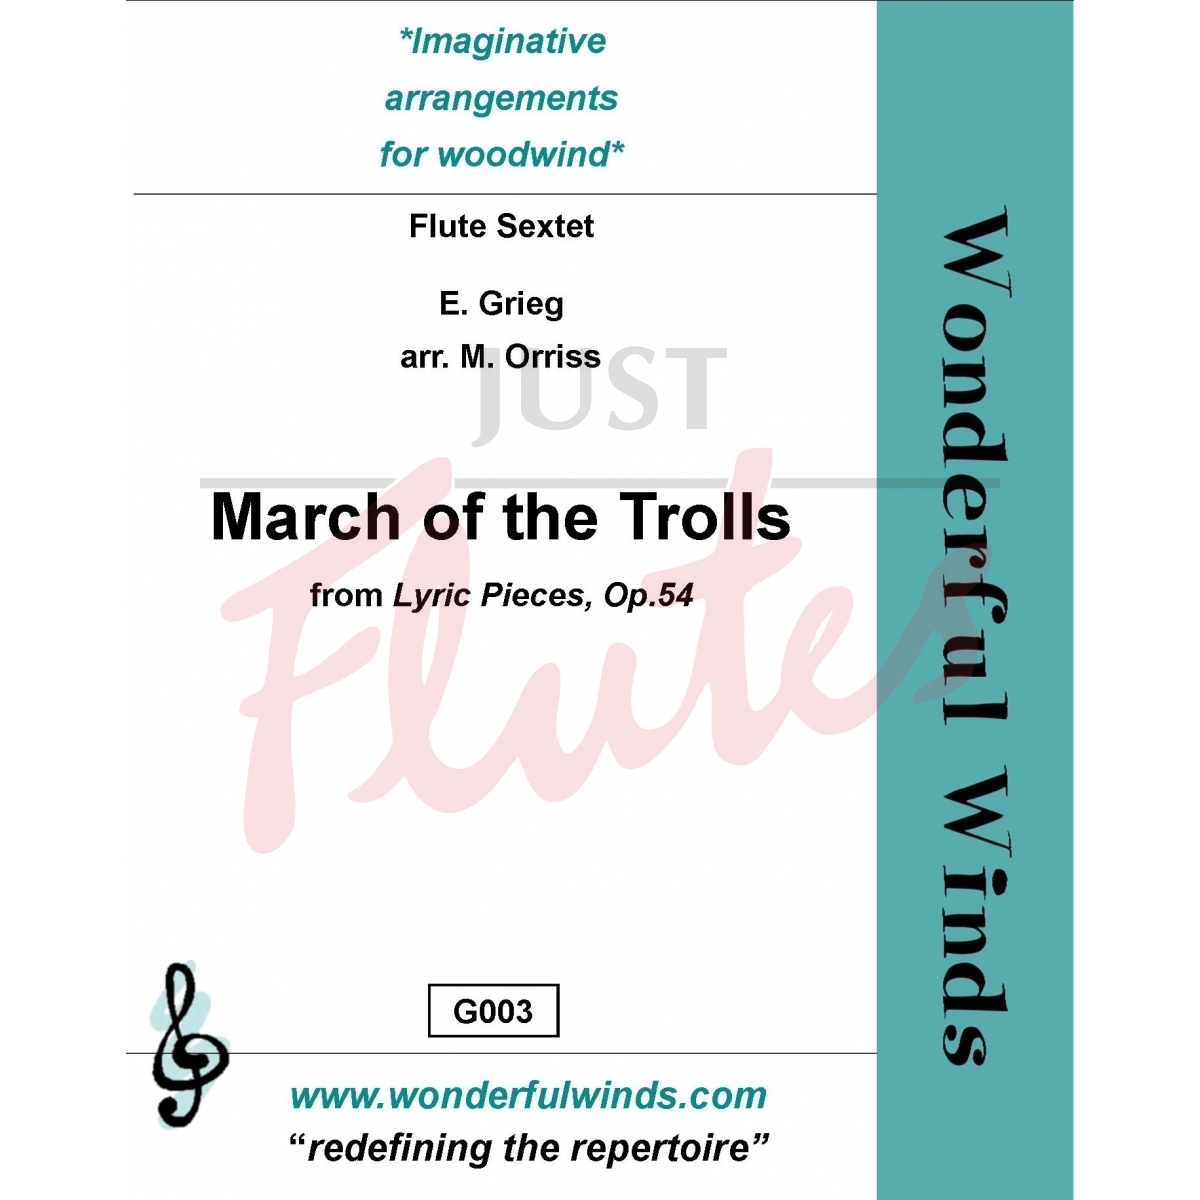 March of the Trolls from Lyric Pieces